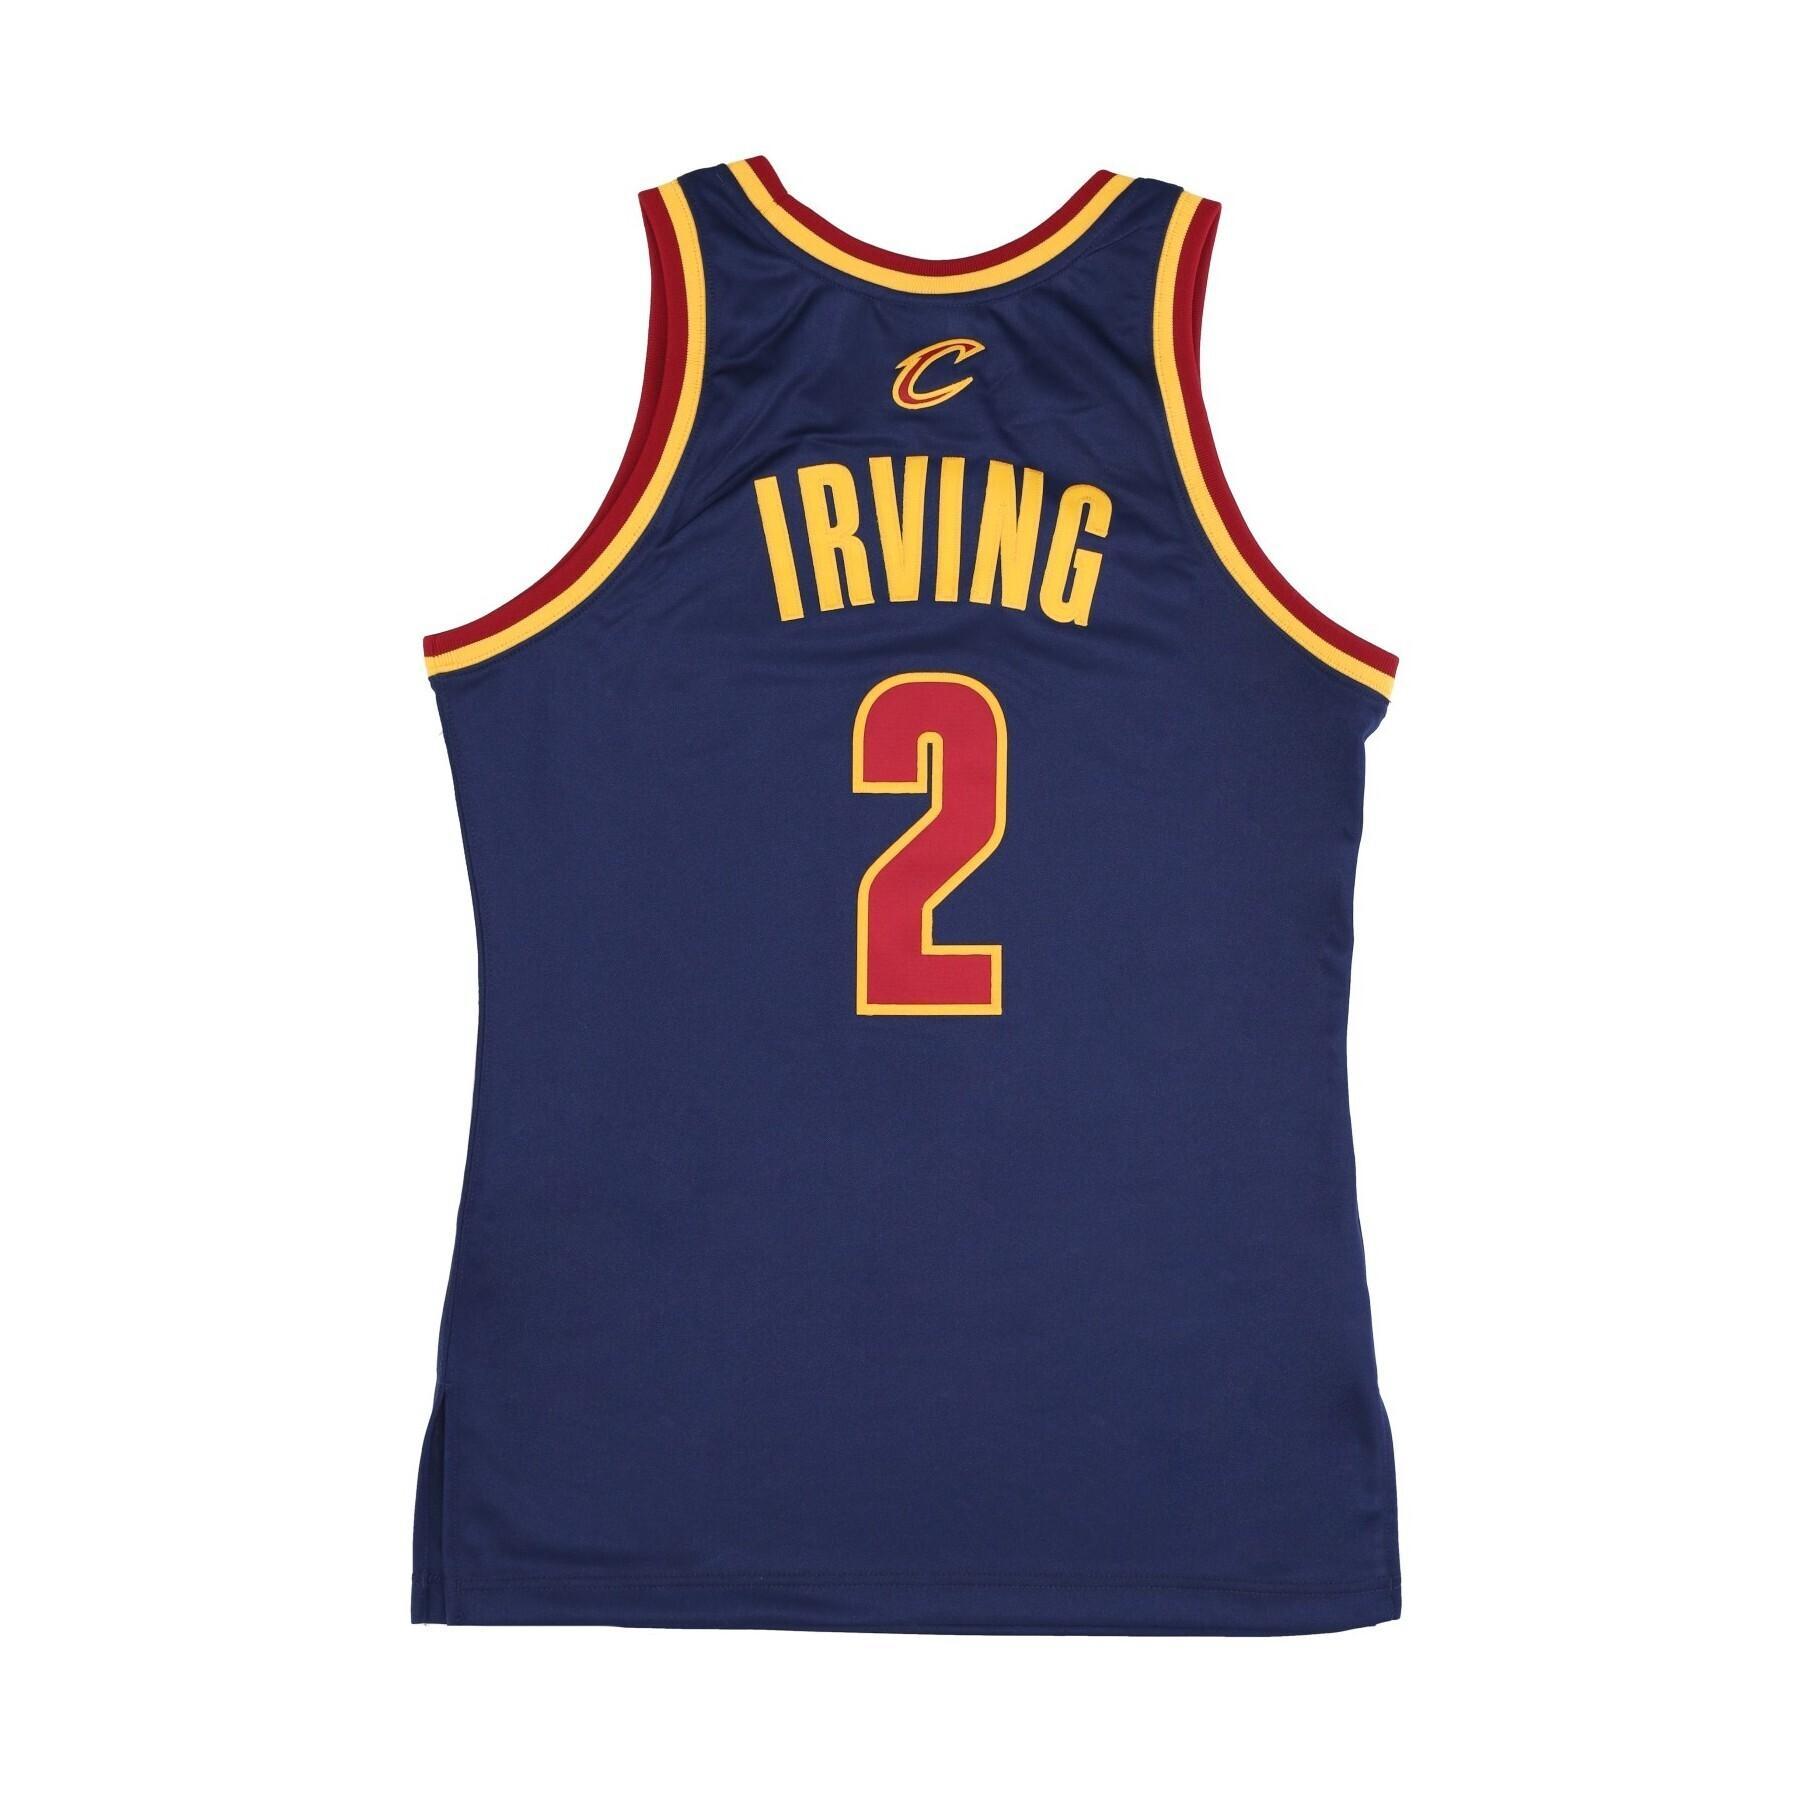 Authentic jersey Cleveland Cavaliers Kyrie Irving Alternate 2011/12